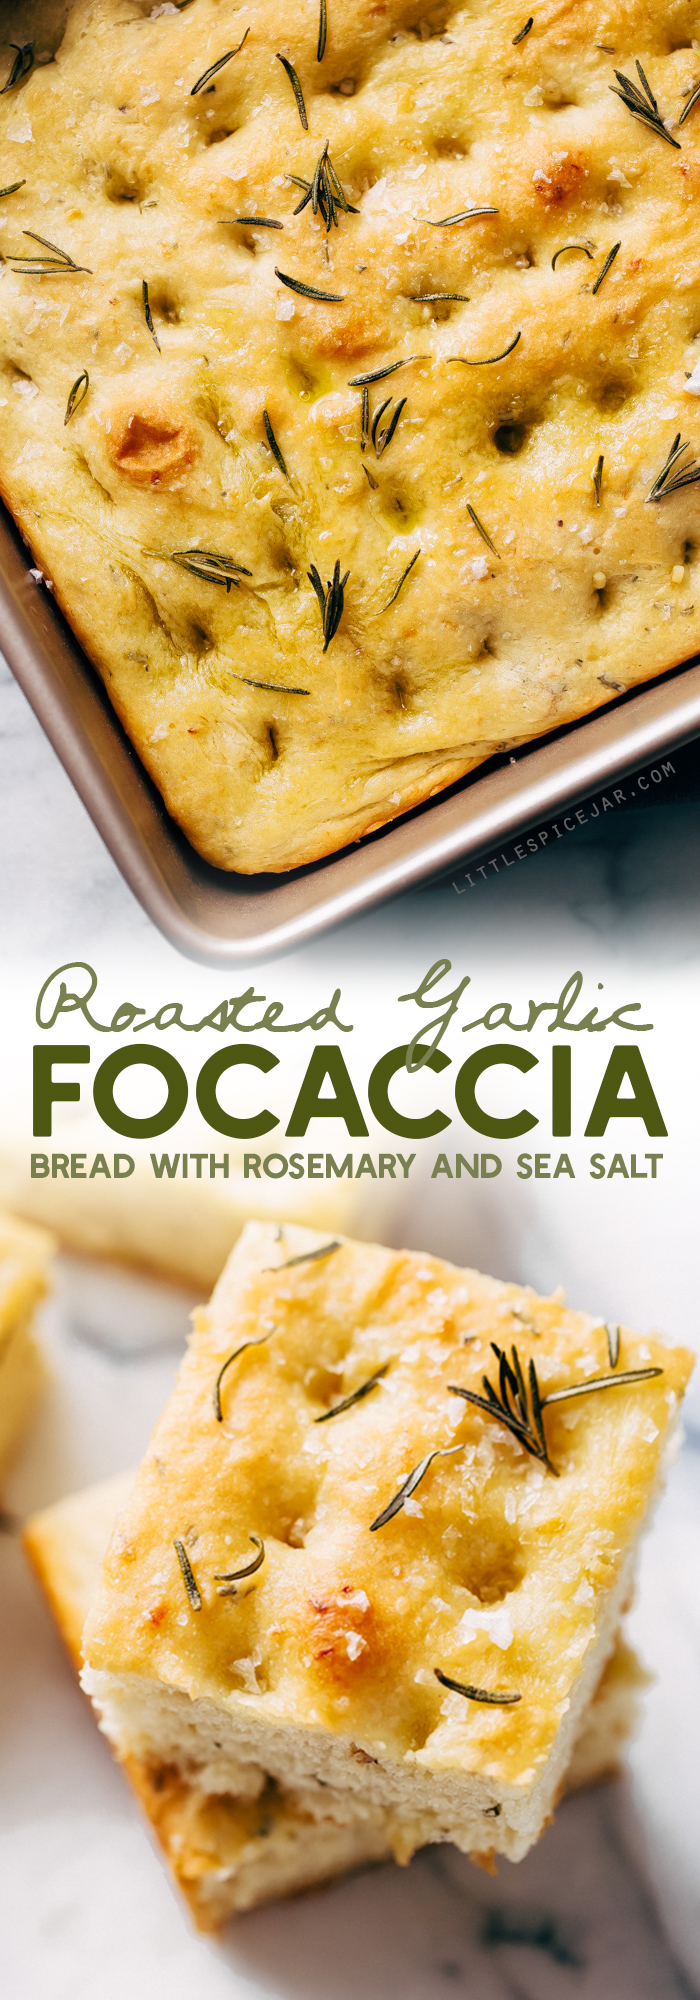 Roasted Garlic Rosemary Focaccia Bread - learn how to make this delicious bread. Serve it with soup, as a side of pasta, or build a sandwich with it! Rosemary focaccia is easy to make and absolutely delicious! #focacciabread #focaccia #rosemaryfocaccia #bread | Littlespicejar.com